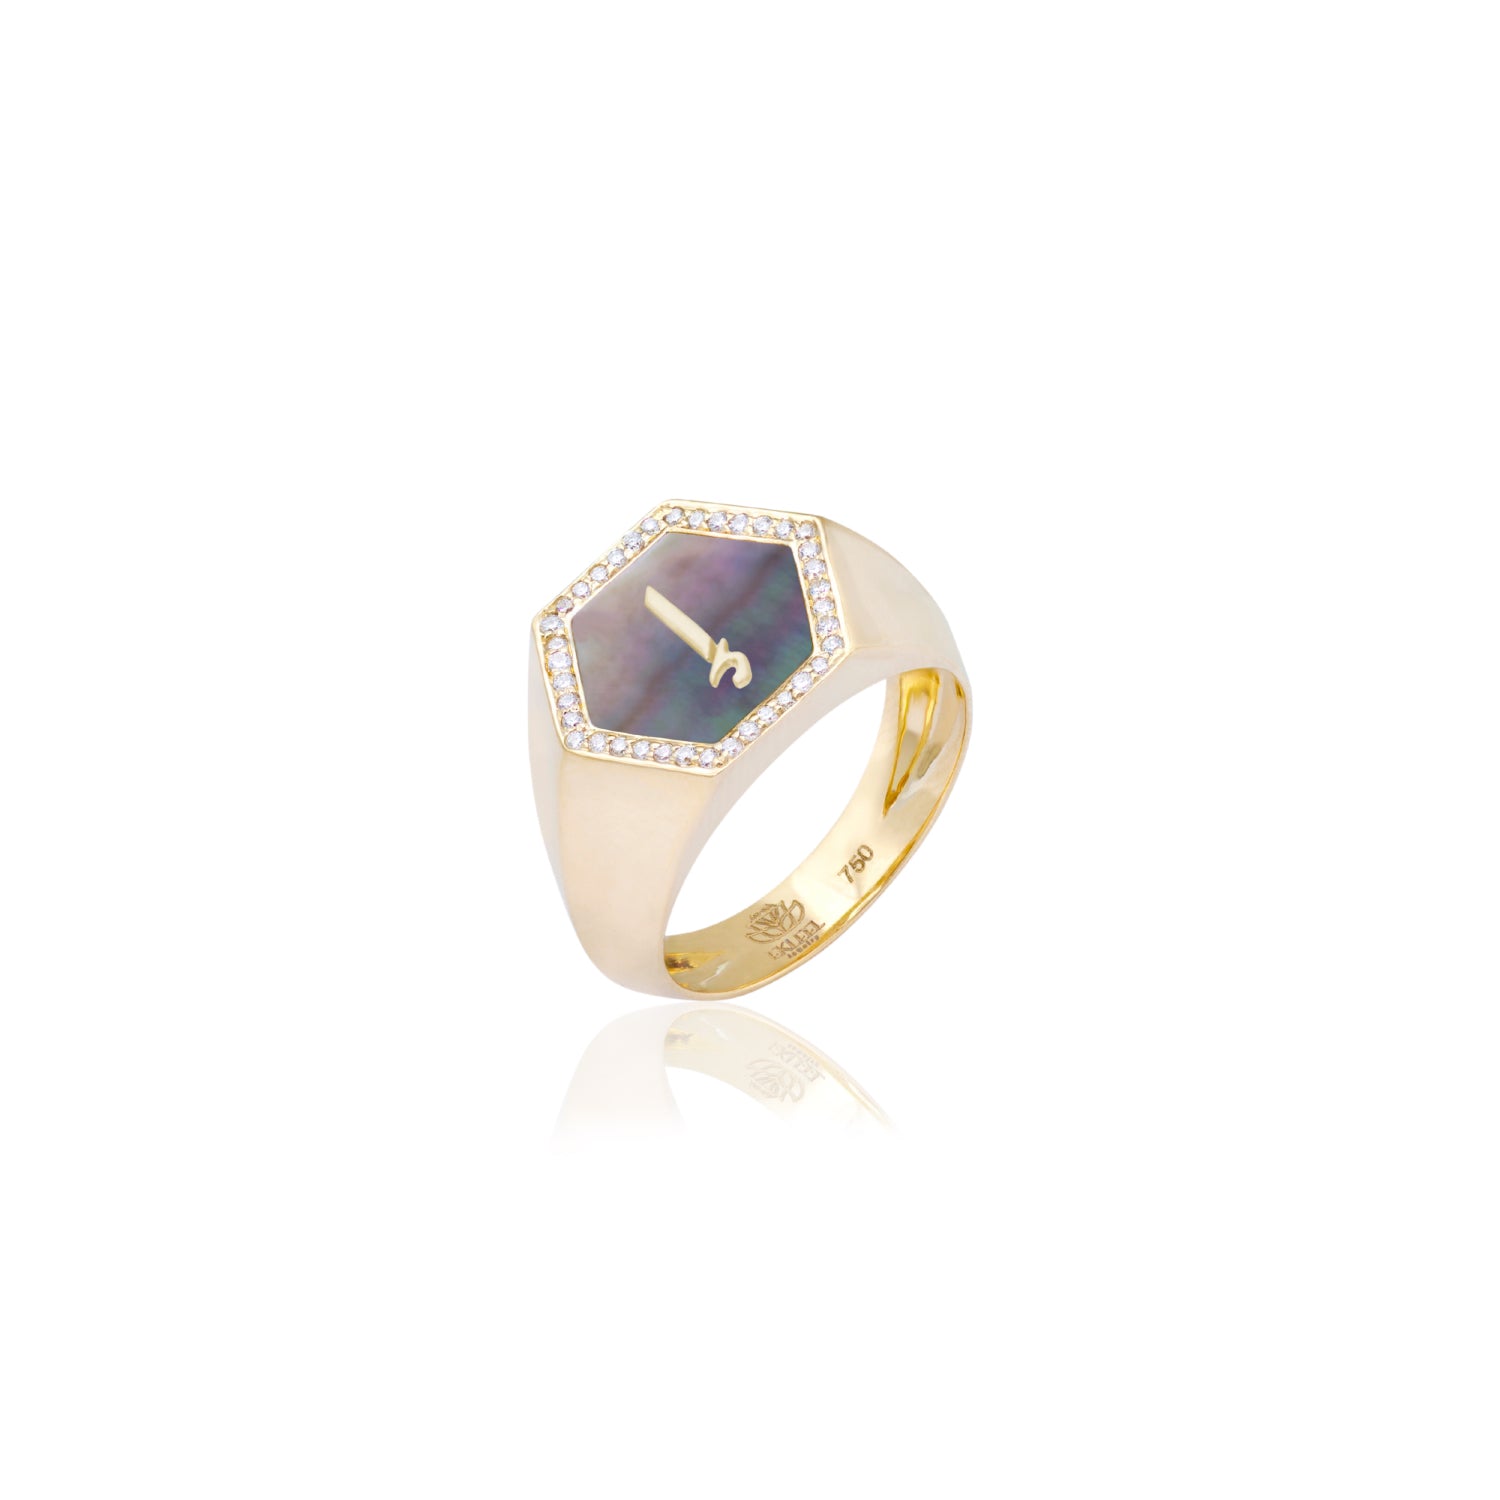 Qamoos 2.0 Letter إ Black Mother of Pearl and Diamond Signet Ring in Yellow Gold